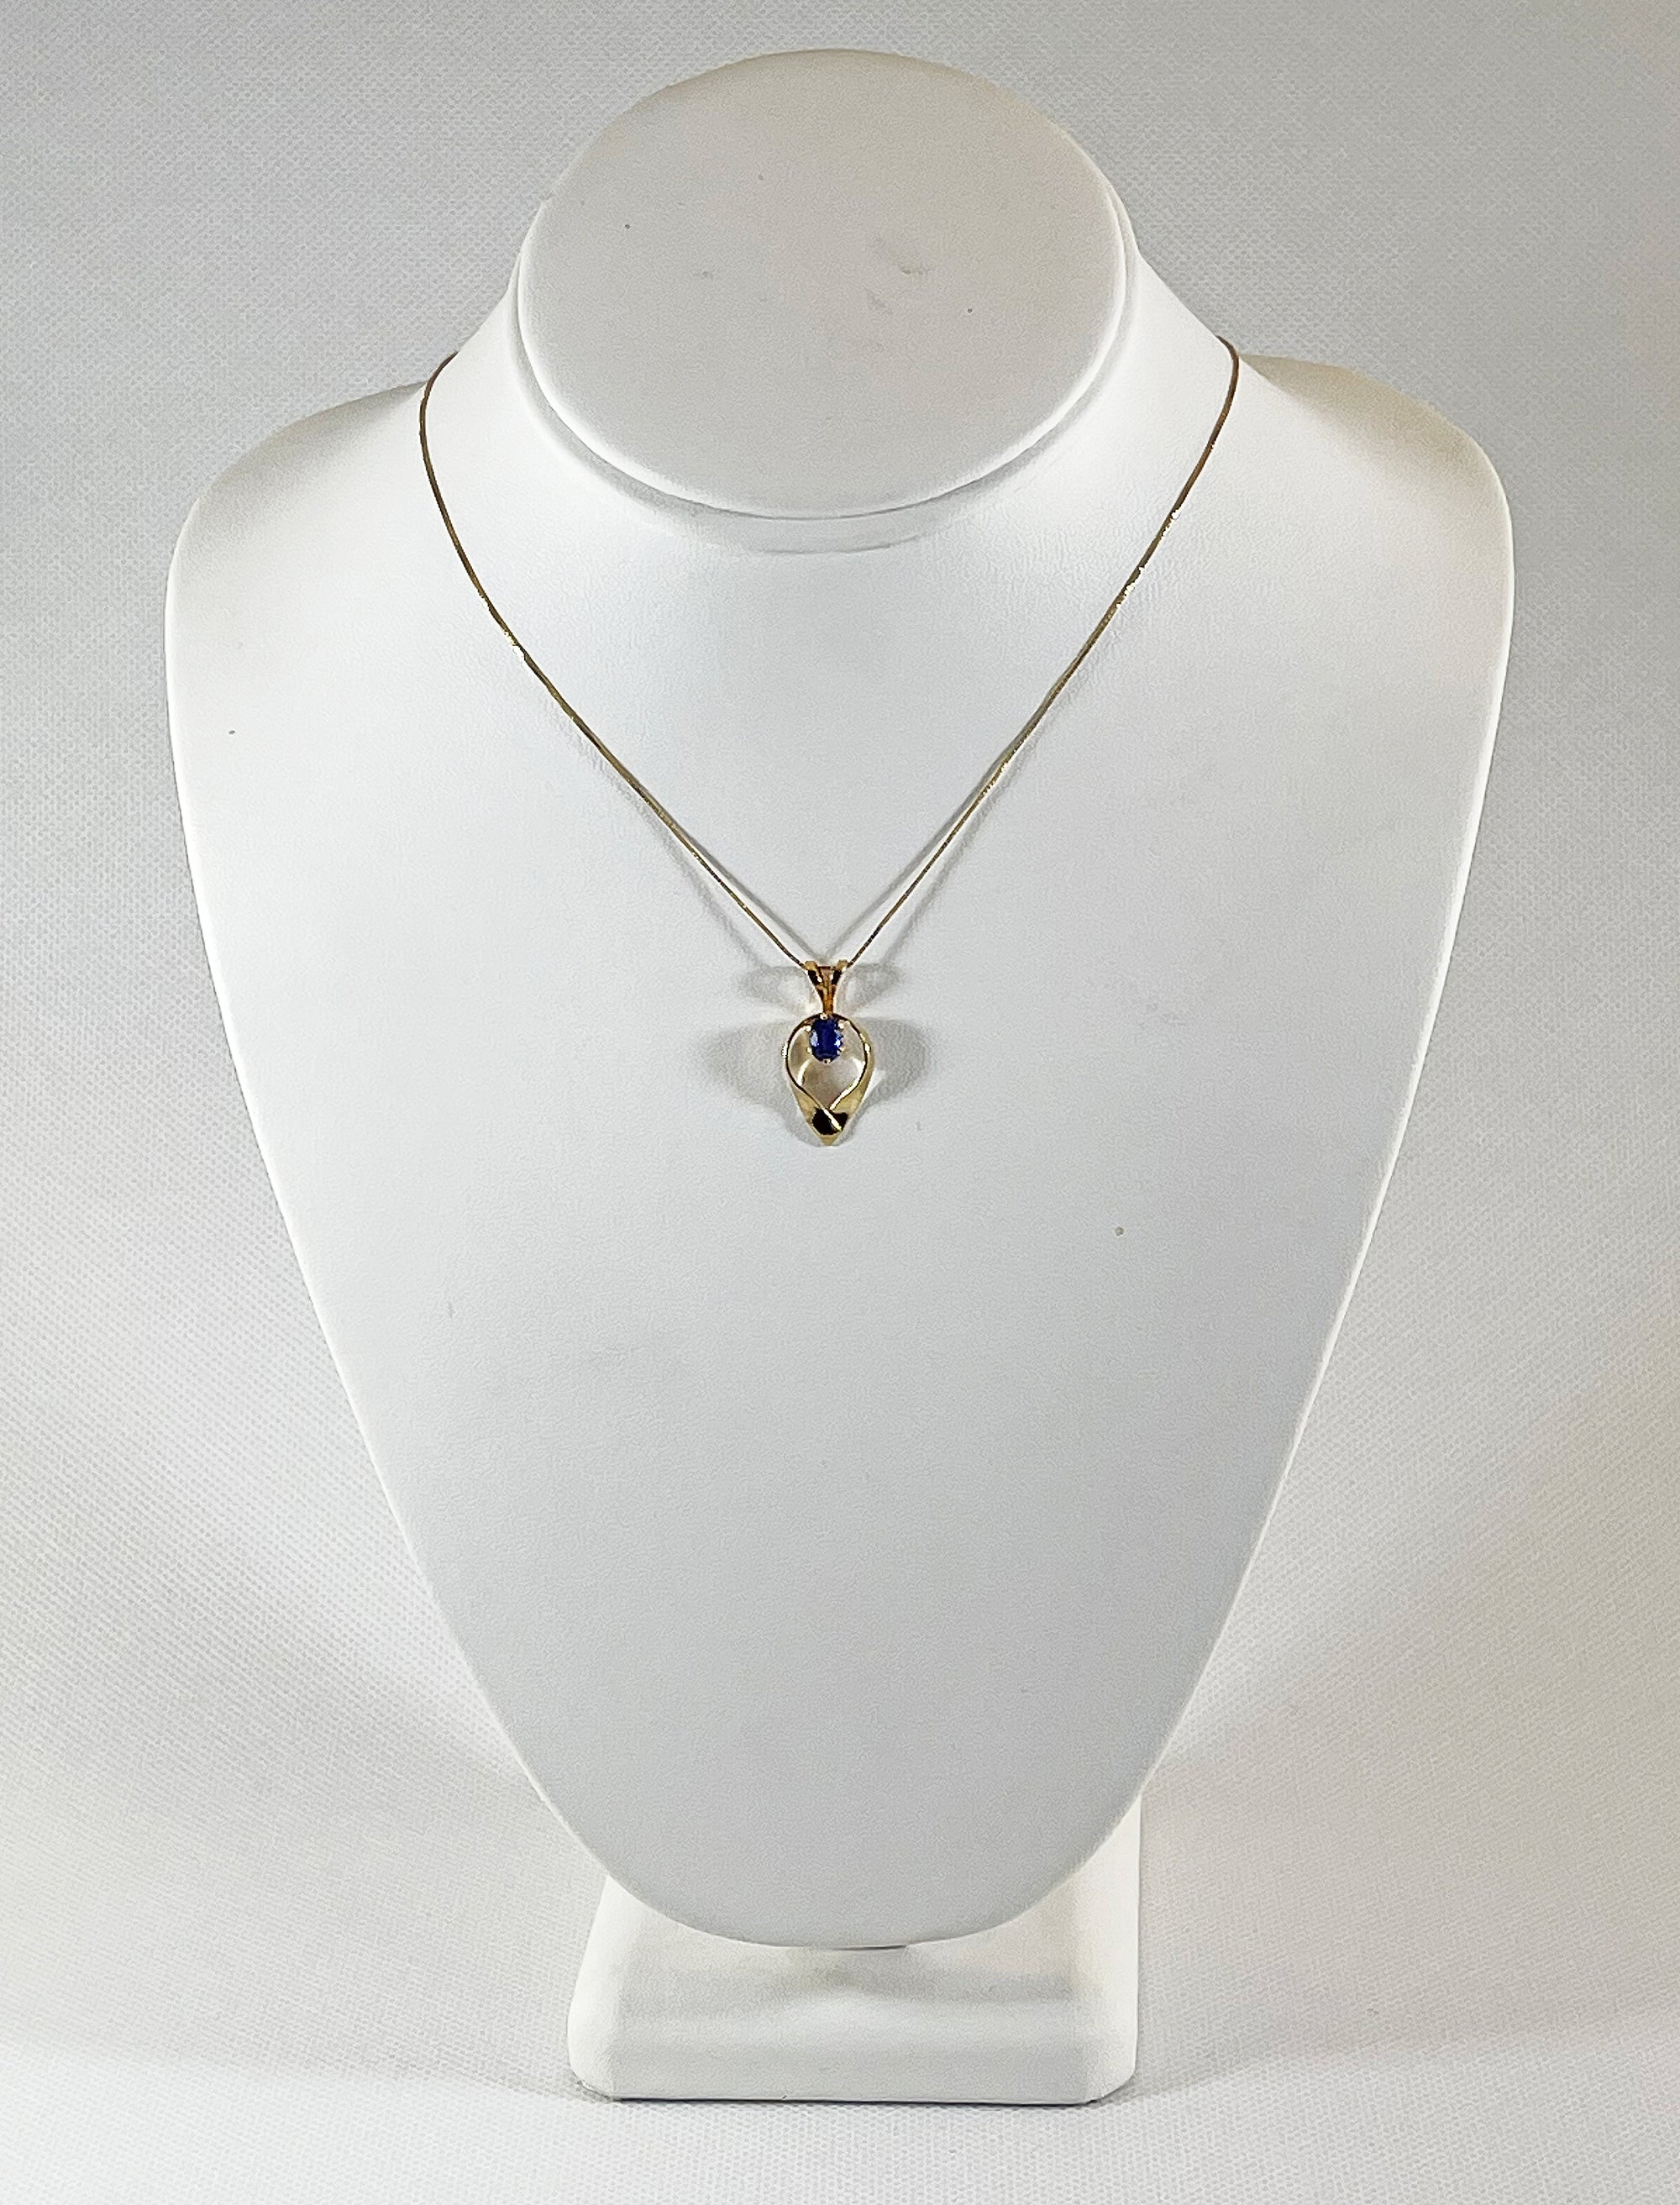 Cole Sheckler Necklace - Ceylon Sapphire Hug Pendant in 14kt Yellow Gold